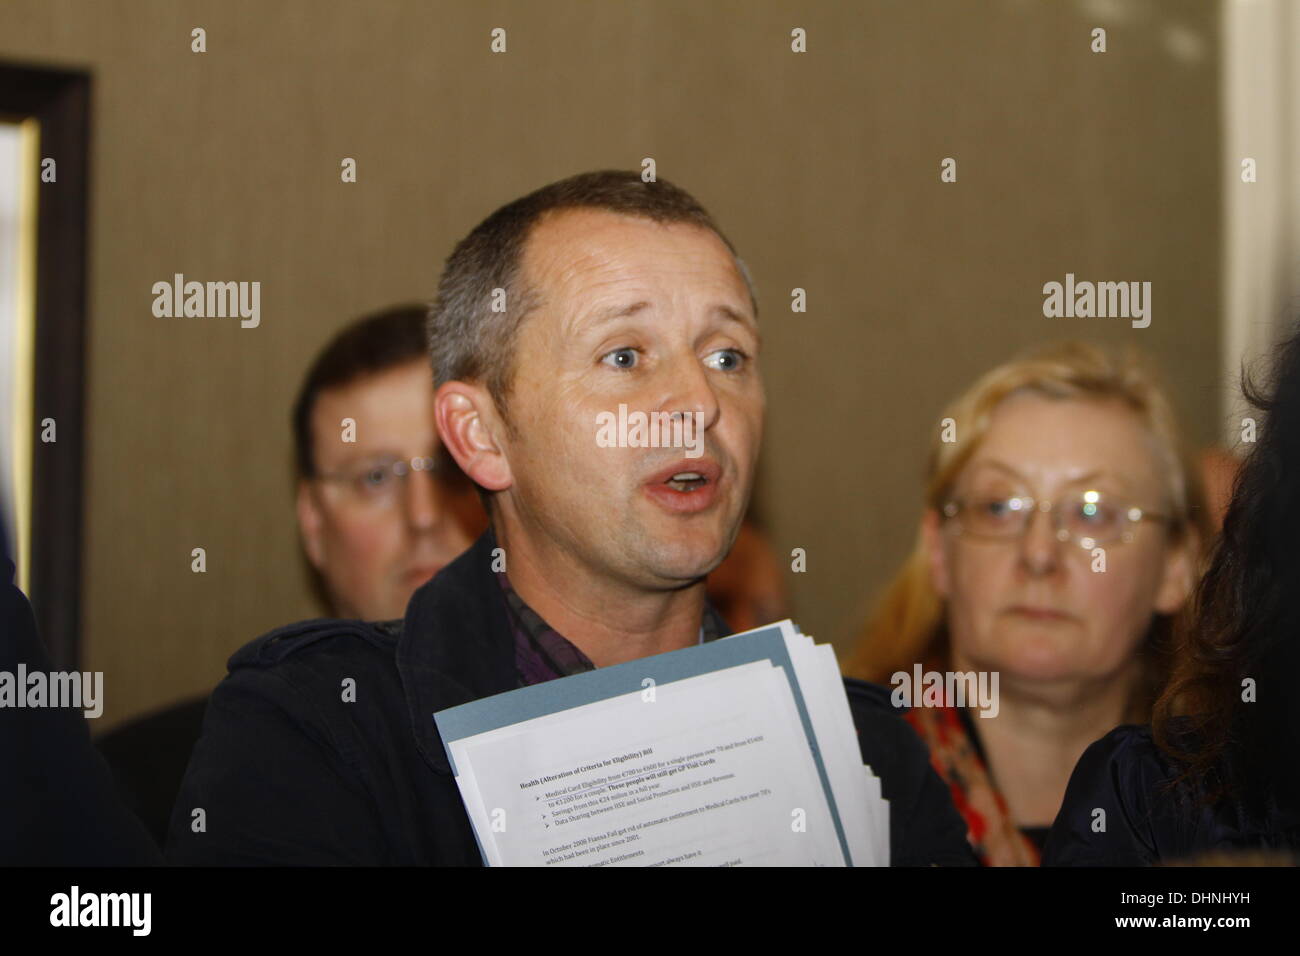 Dublin, Ireland. 13th November 2013. United Left Alliance TD (member of the Irish Parliament) Richard Boyd Barrett supports the Human Rights complaint at the press conference. The Center of Reproductive Rights brought a case against Ireland to the UN Human Rights Committee on behalf of Amanda Mellet. She had to travel to the UK for an abortion after she had been diagnosed with fatal fetal abnormality during her pregnancy. Abortions for fatal fetal abnormalities are illegal in Ireland. Credit:  Michael Debets/Alamy Live News Stock Photo